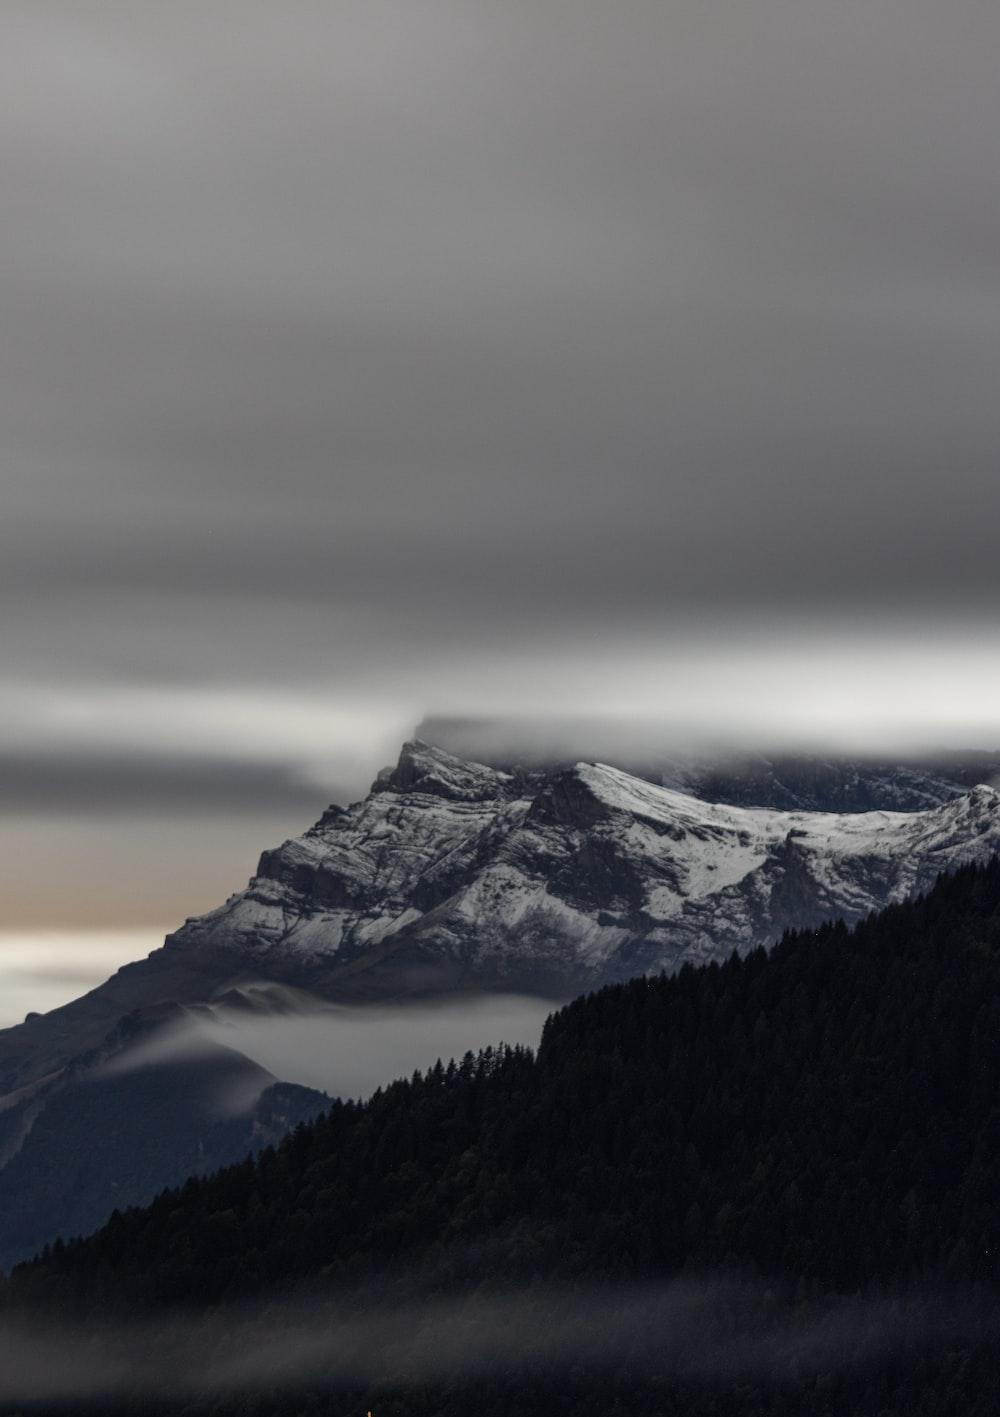 A Mountain Covered In Snow And Clouds Under Cloudy Sky Photo